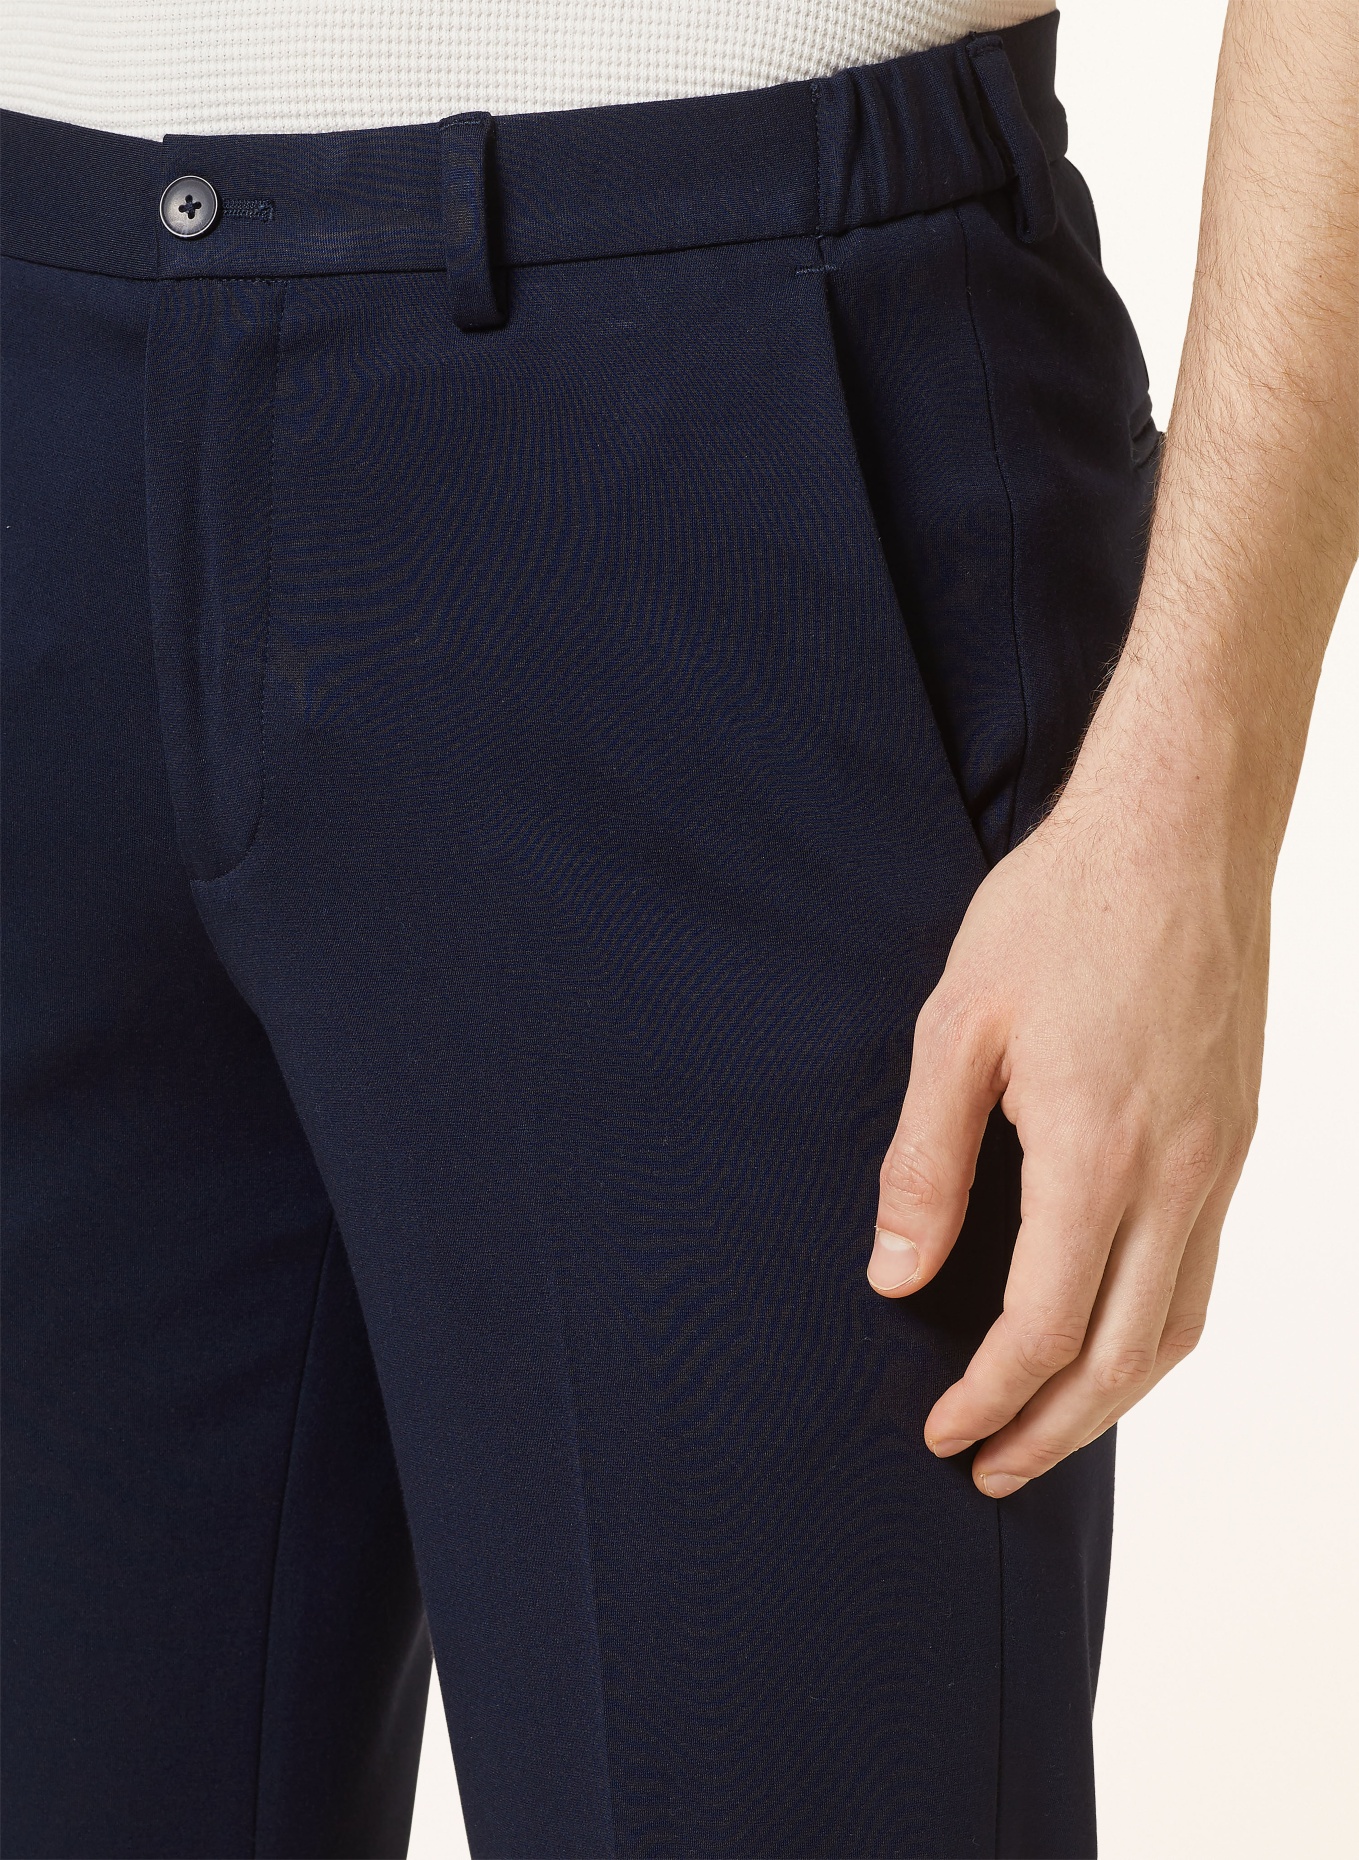 PAUL Suit trousers extra slim fit made of jersey, Color: DARK BLUE (Image 7)